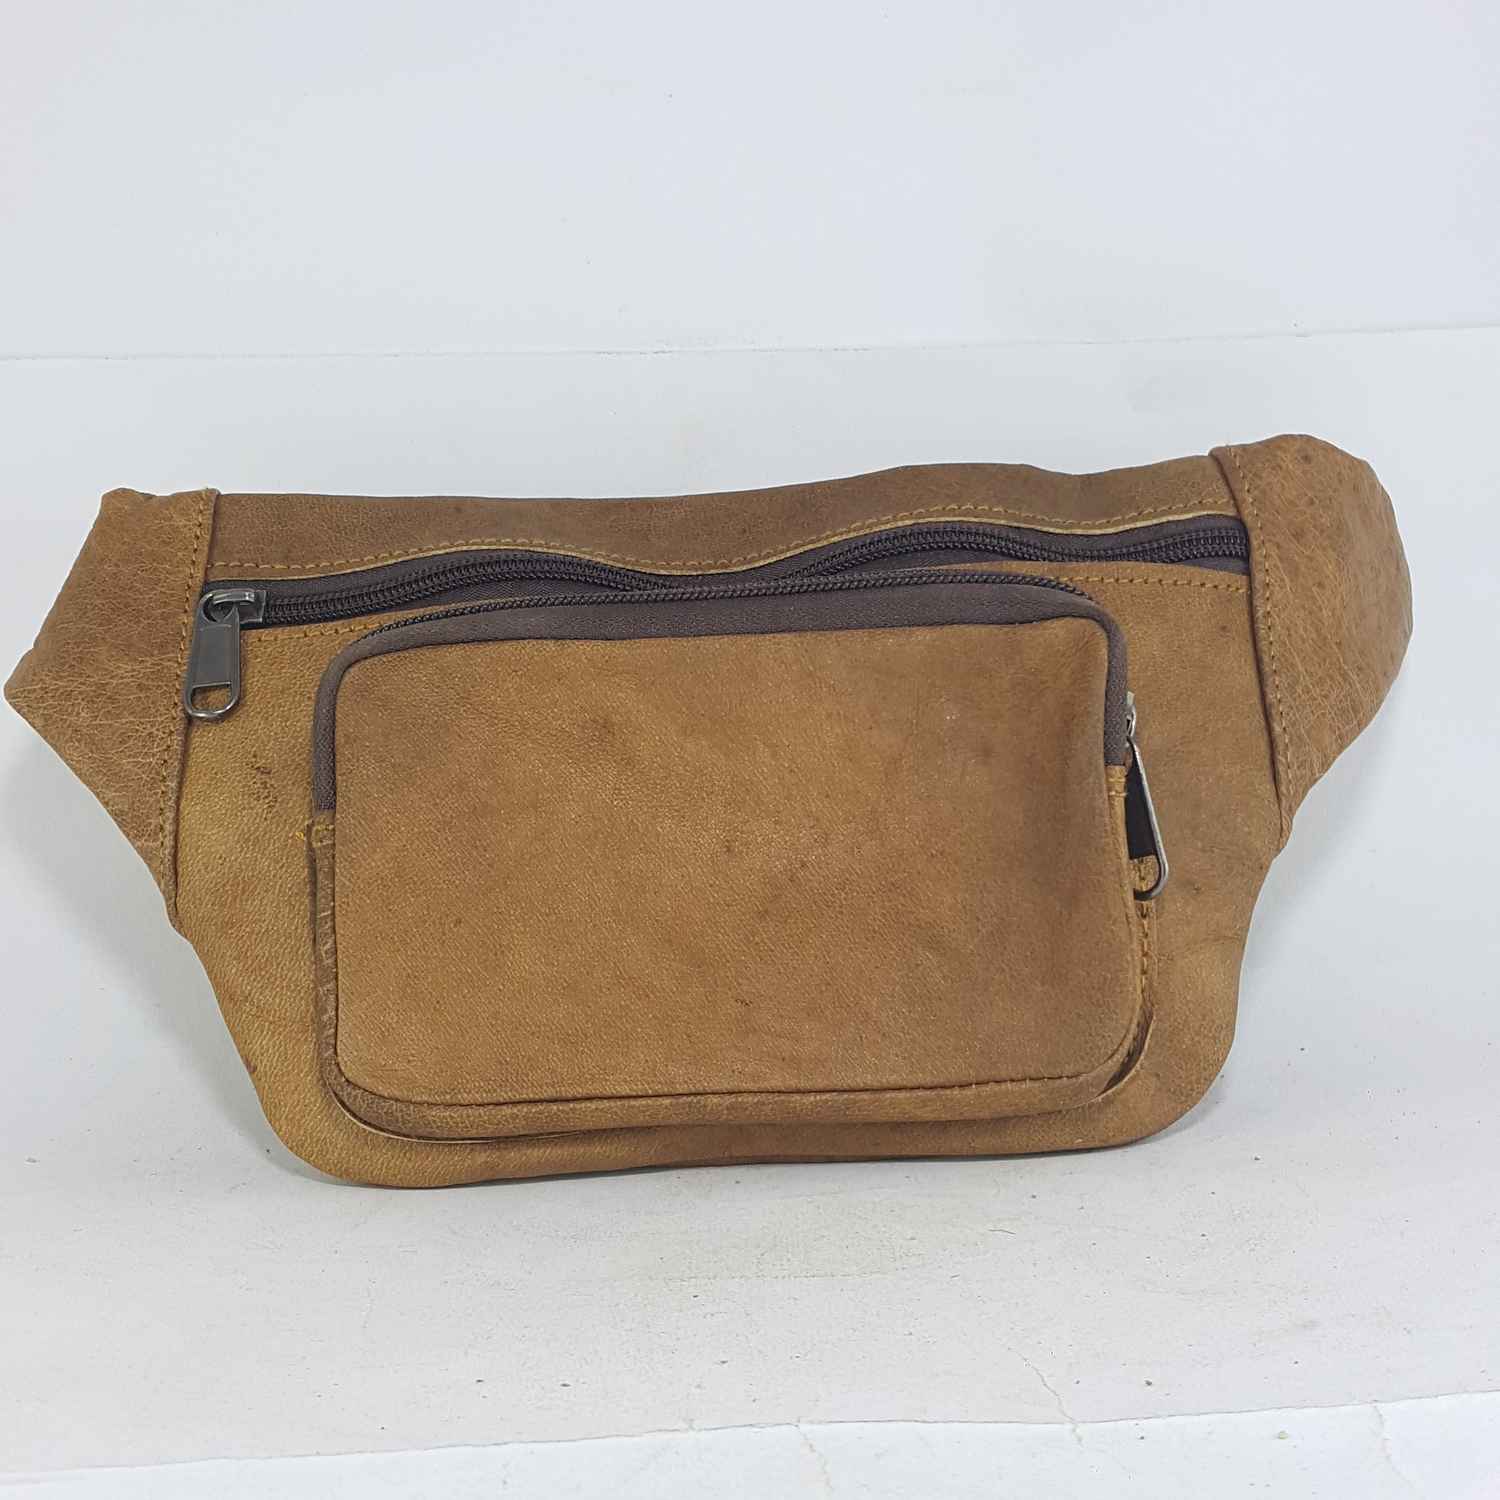 BAGS LEATHER AND COTTON - Handmade Bags, Mountain Goat Leather, Cotton ...